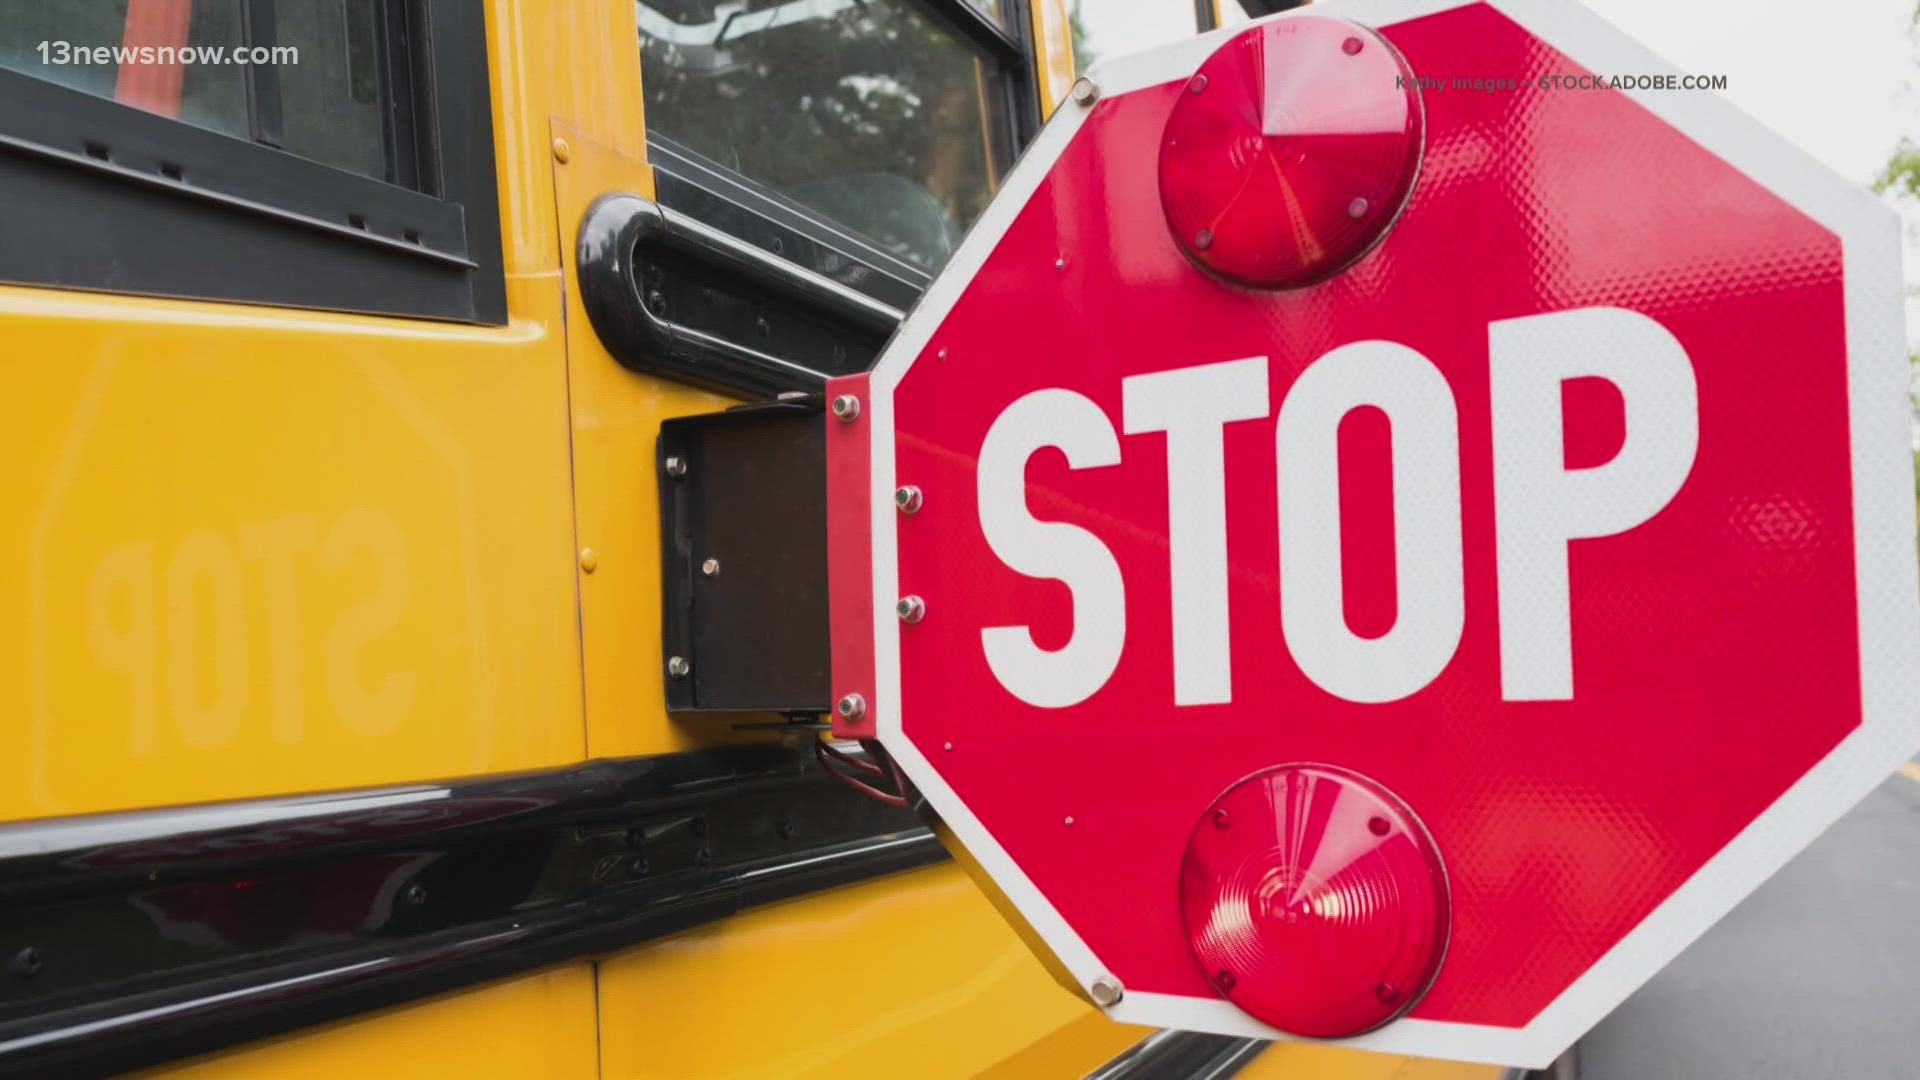 A new study by our Norfolk hospital systems is showing how quickly COVID-19 transmits on school buses.